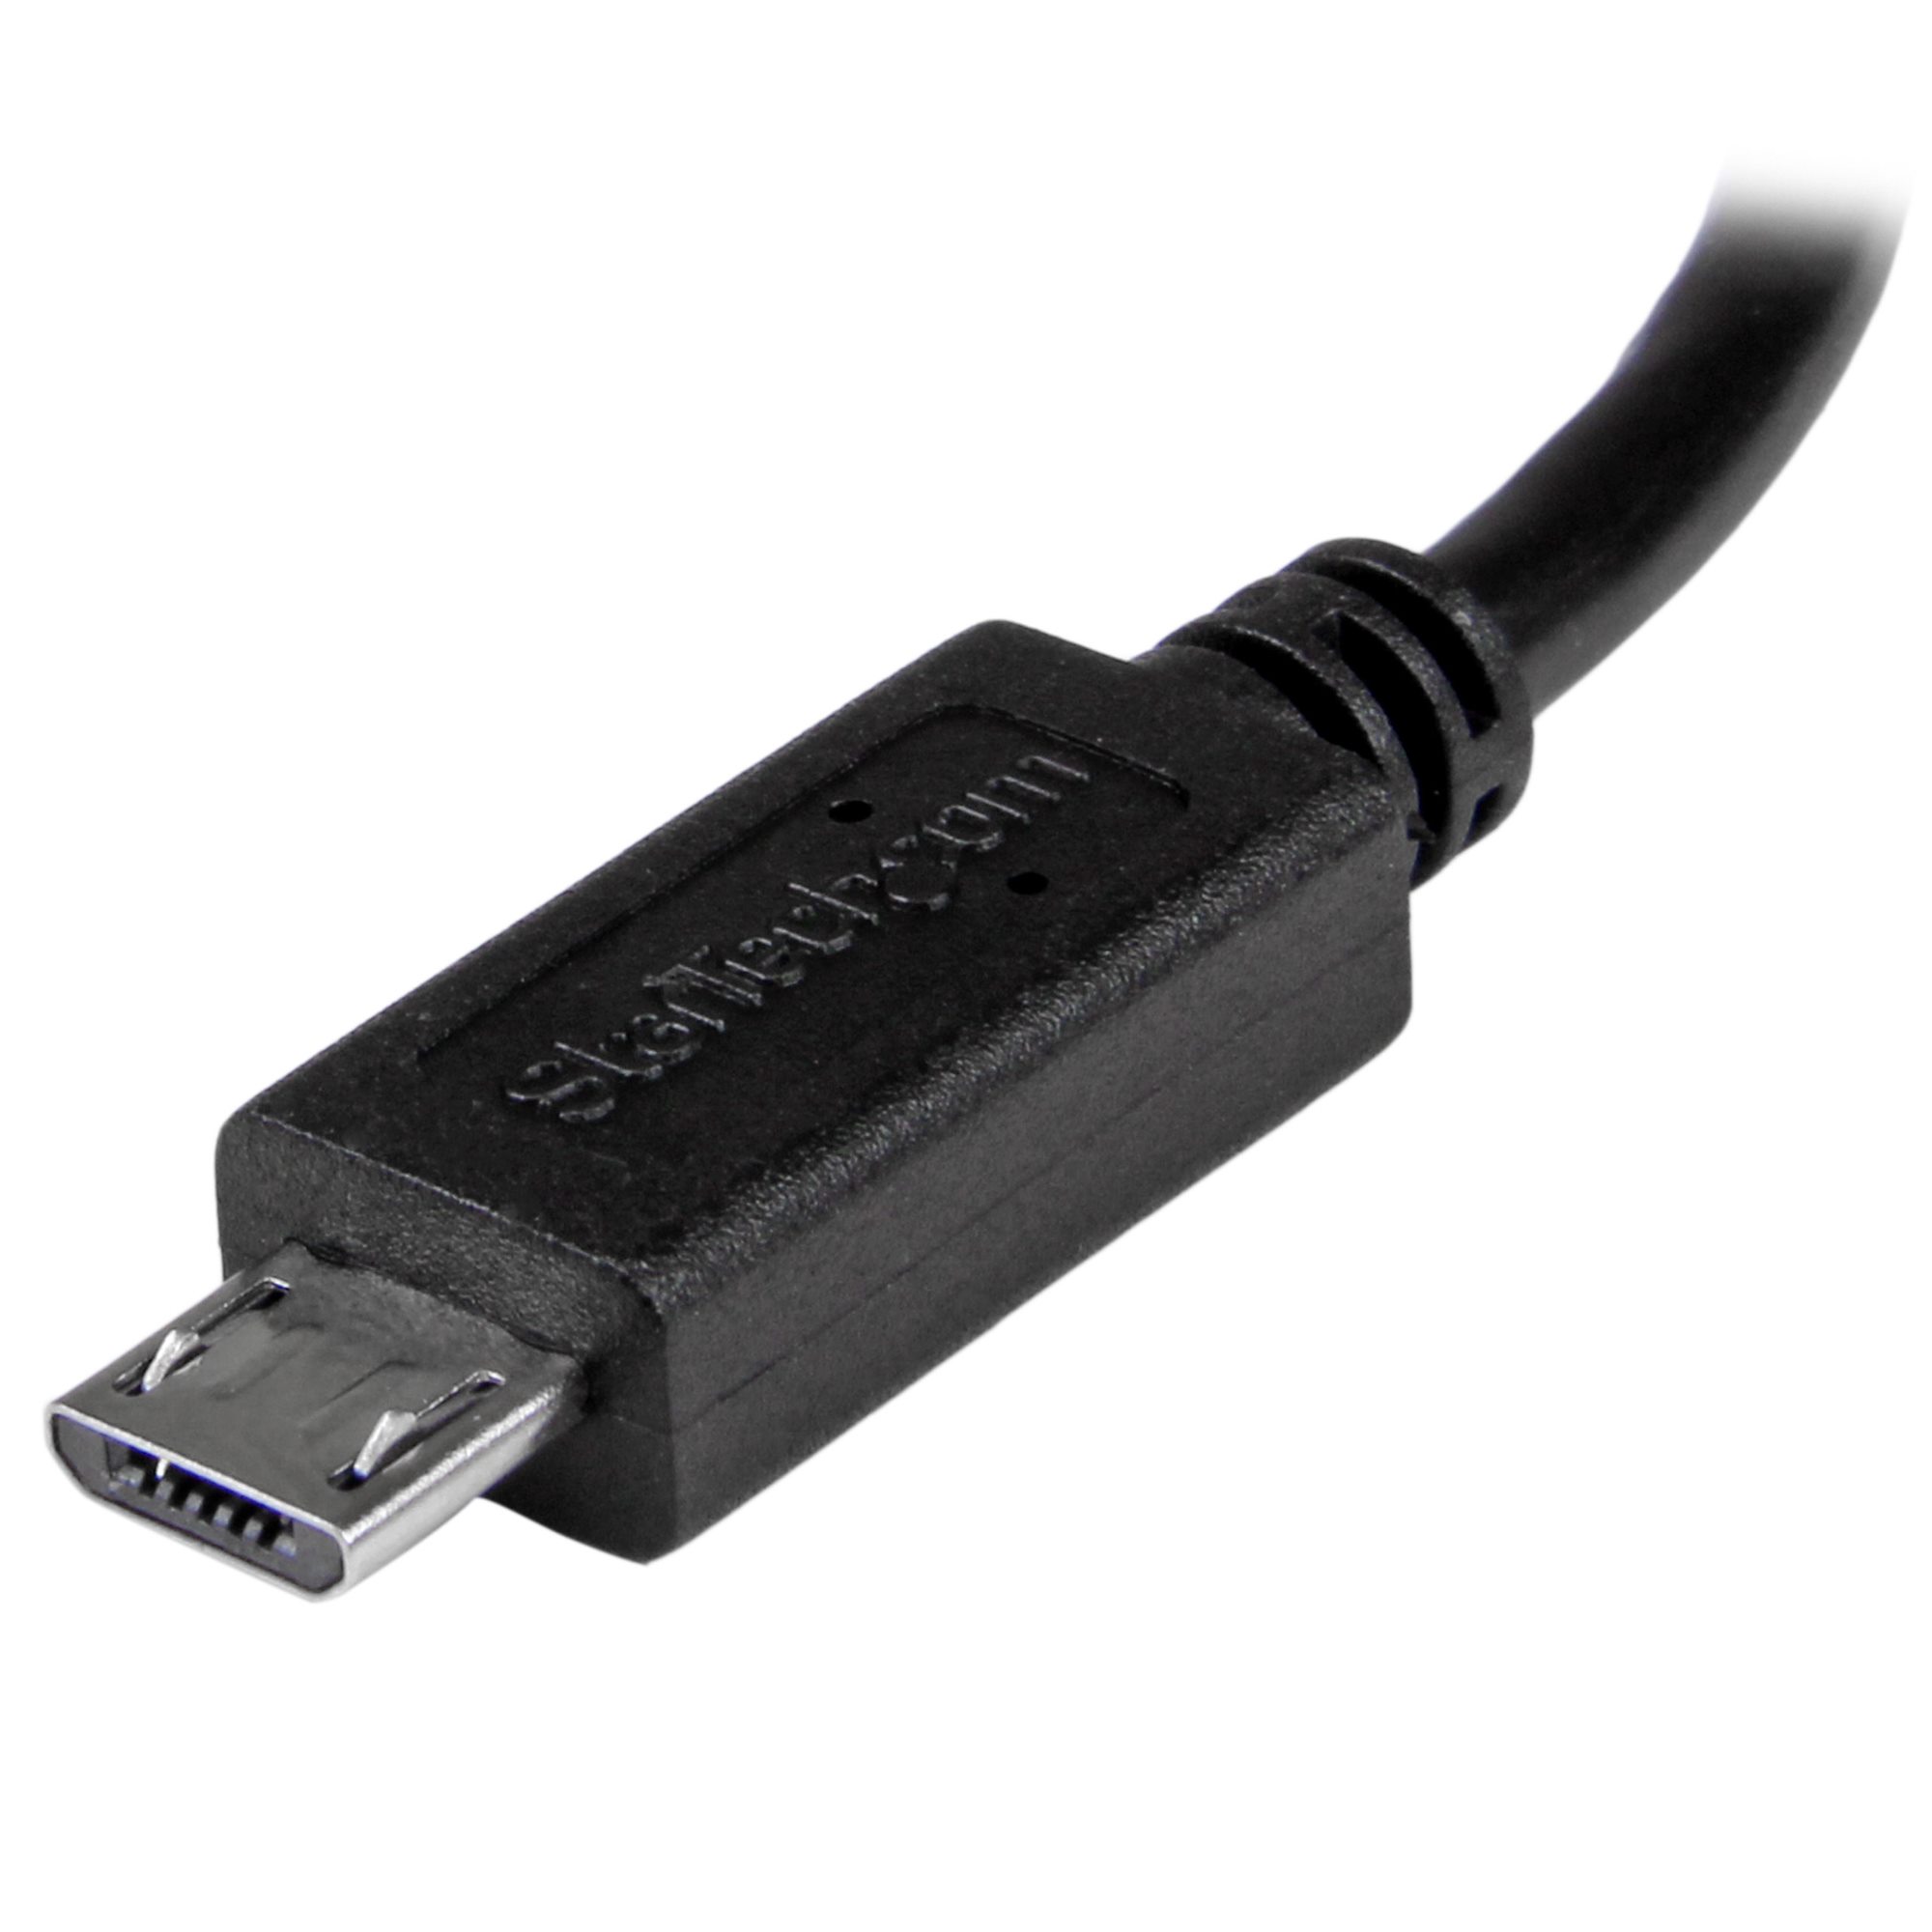 USB OTG Cable - Micro USB to Mini USB - M/M - 8 in. - BCI Imaging Supplies